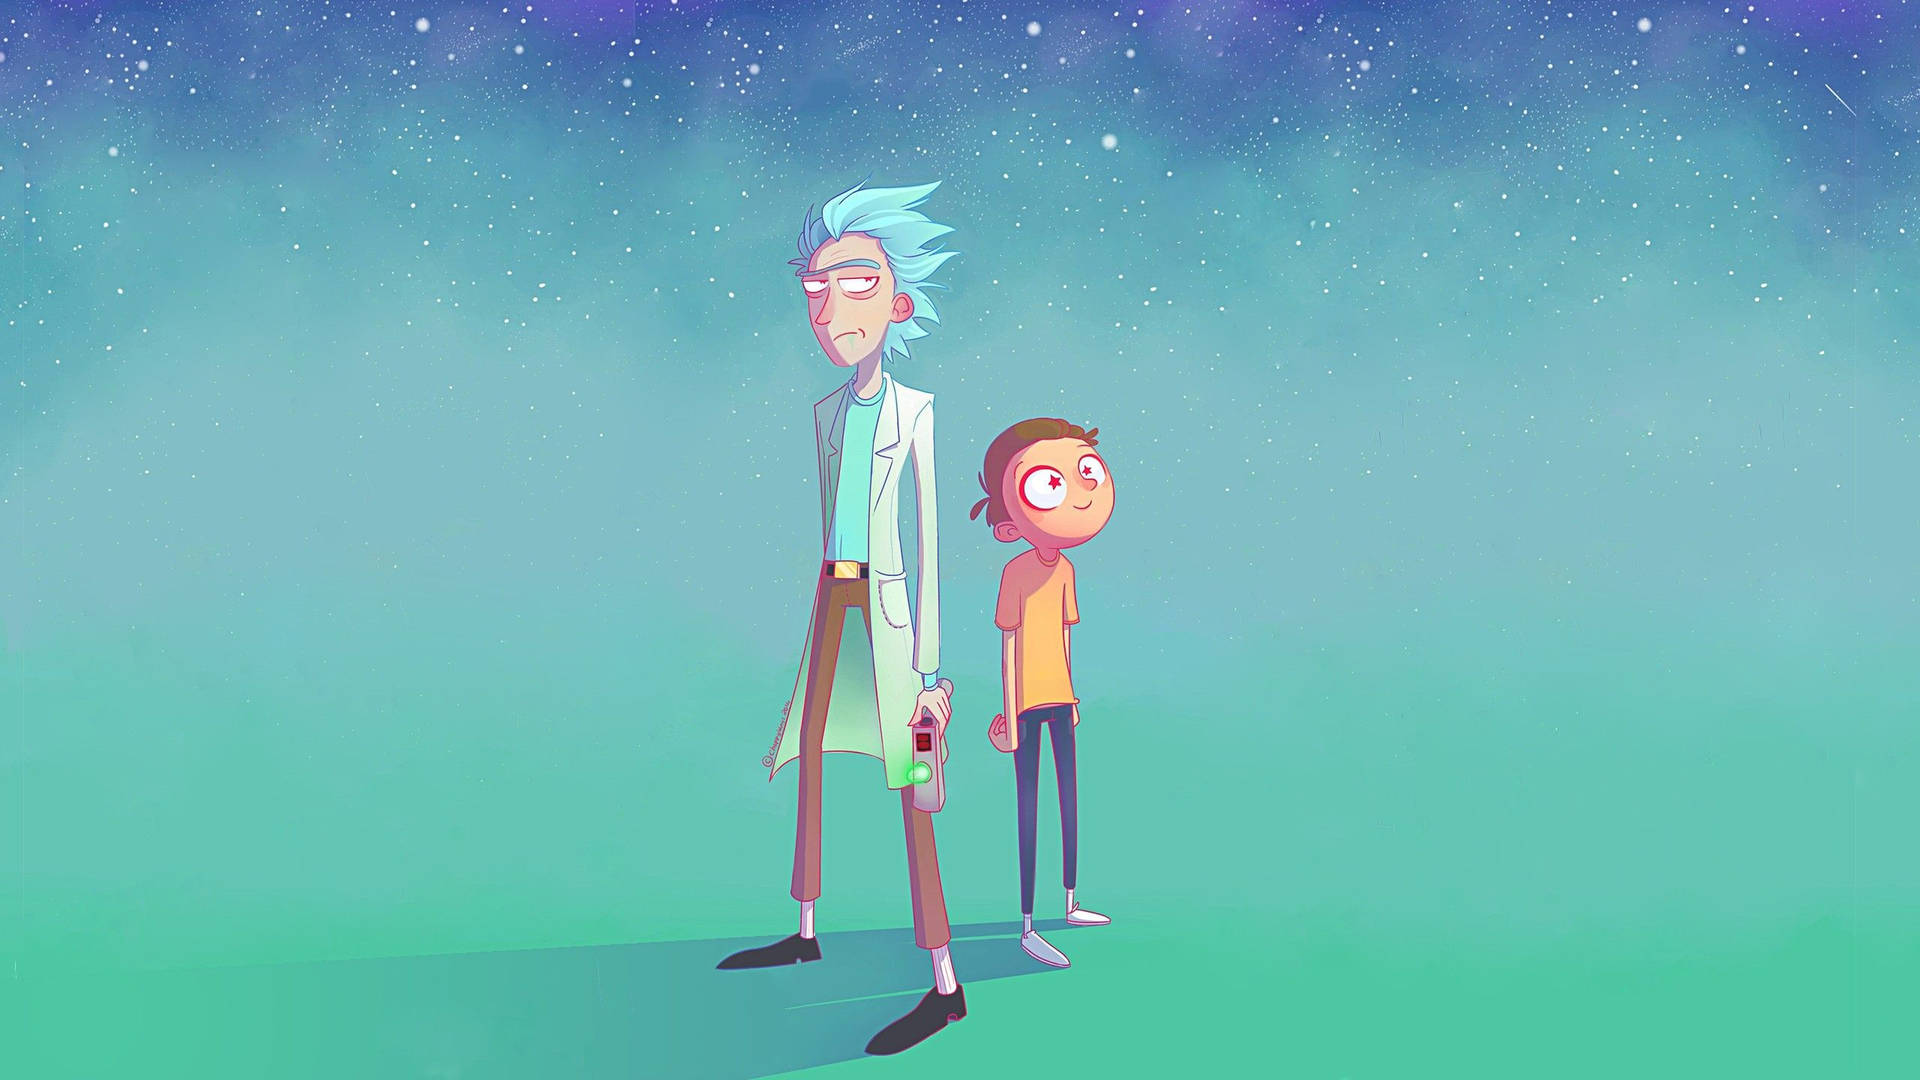 Image Fun And Adventure With Rick And Morty Wallpaper